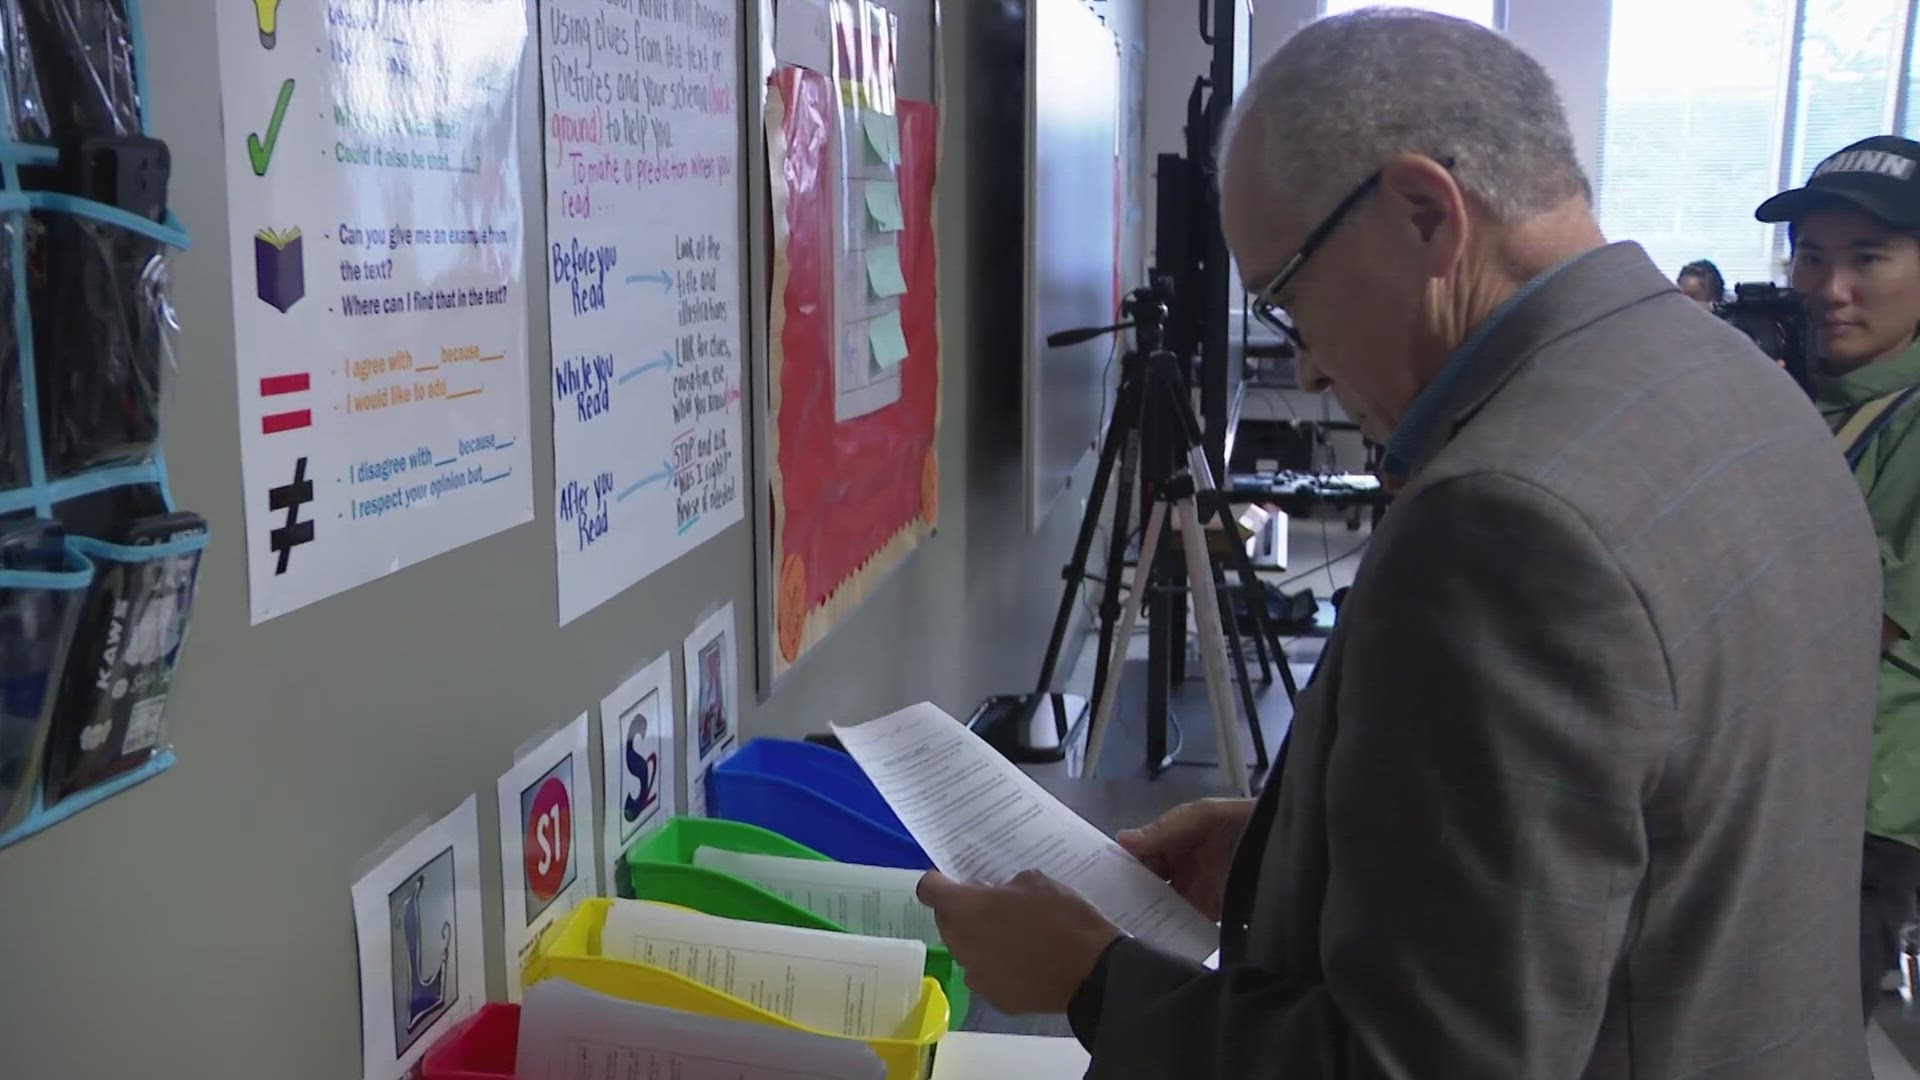 KHOU 11 got a first-hand look inside a Houston ISD "New Education System" school on Wednesday.